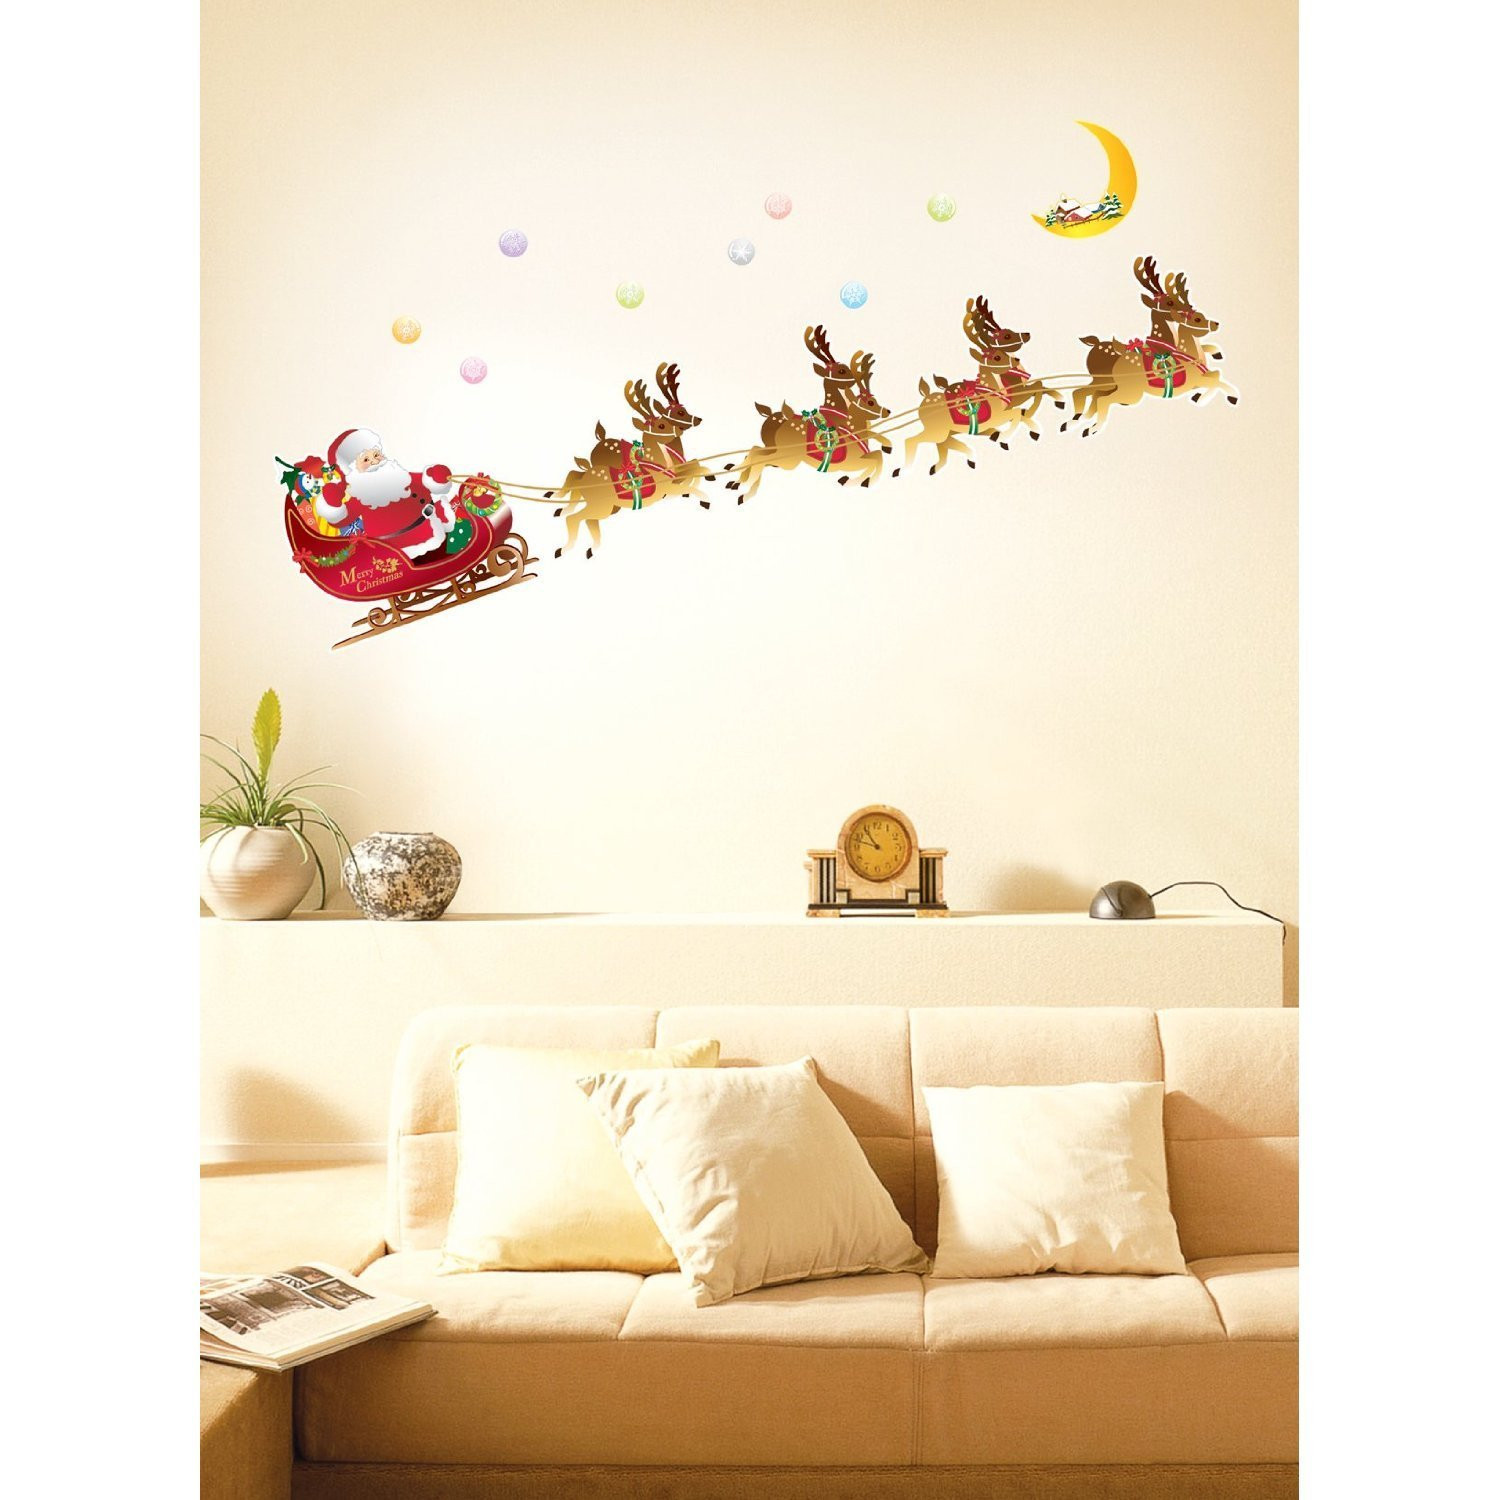 Wall Christmas Decor
 Christmas Wall Decorations Ideas for This Year